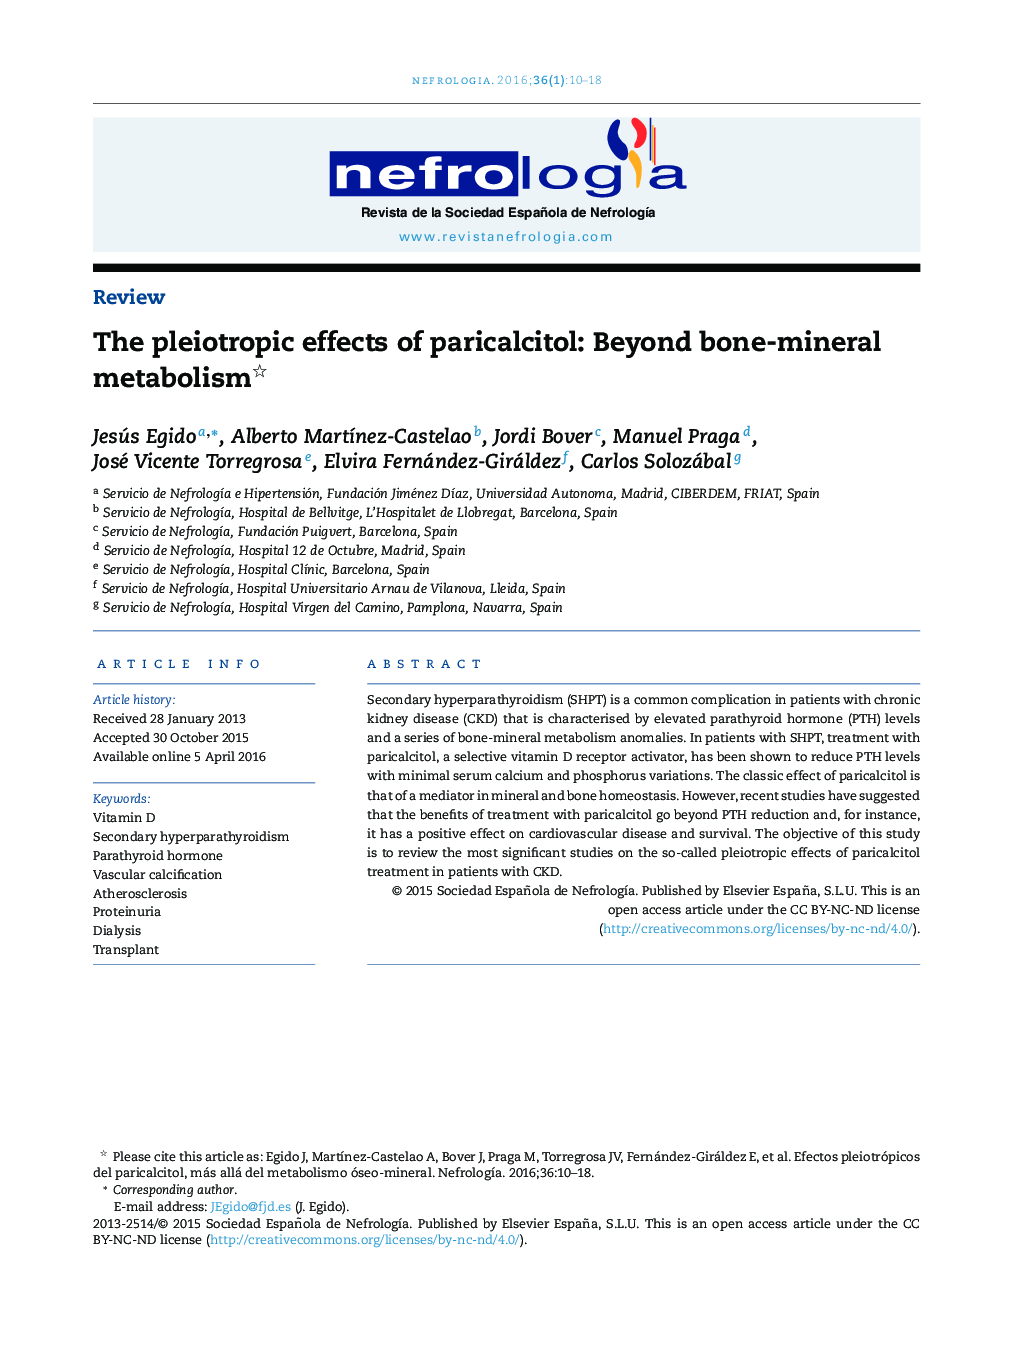 The pleiotropic effects of paricalcitol: Beyond bone-mineral metabolism 